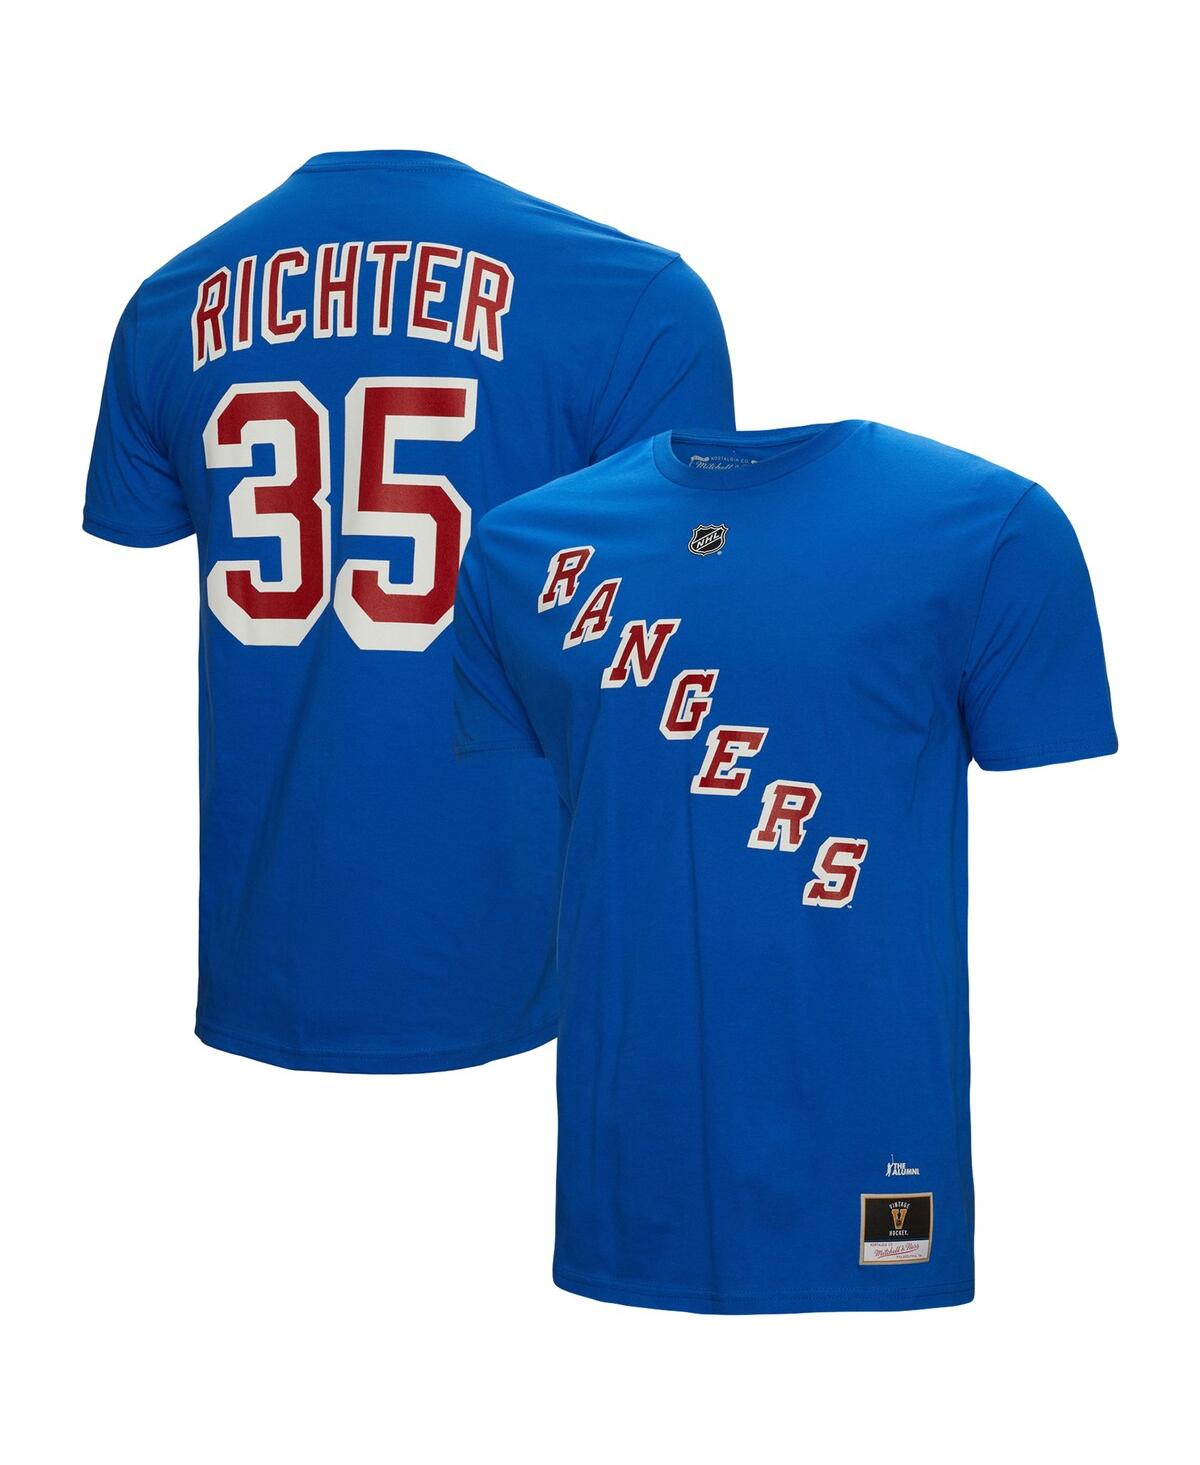 MITCHELL & NESS MEN'S MITCHELL & NESS MIKE RICHTER BLUE NEW YORK RANGERS NAME AND NUMBER T-SHIRT